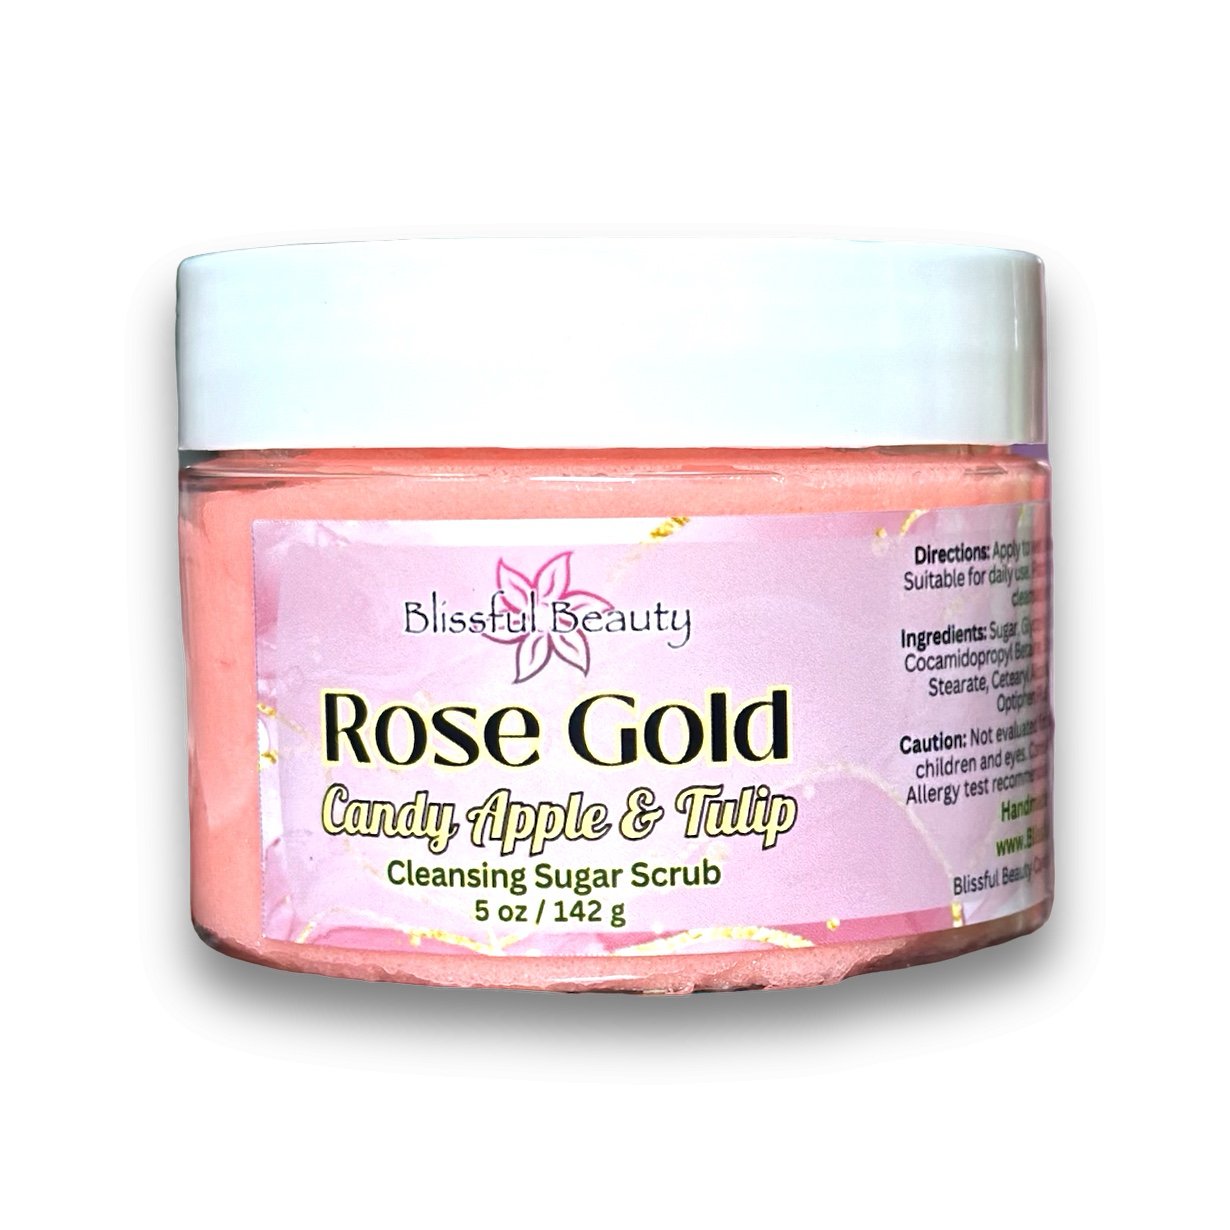 Rose Gold | Candy Apple & Tulip | Cleansing Sugar Scrub - Blissful Beauty Candle Co